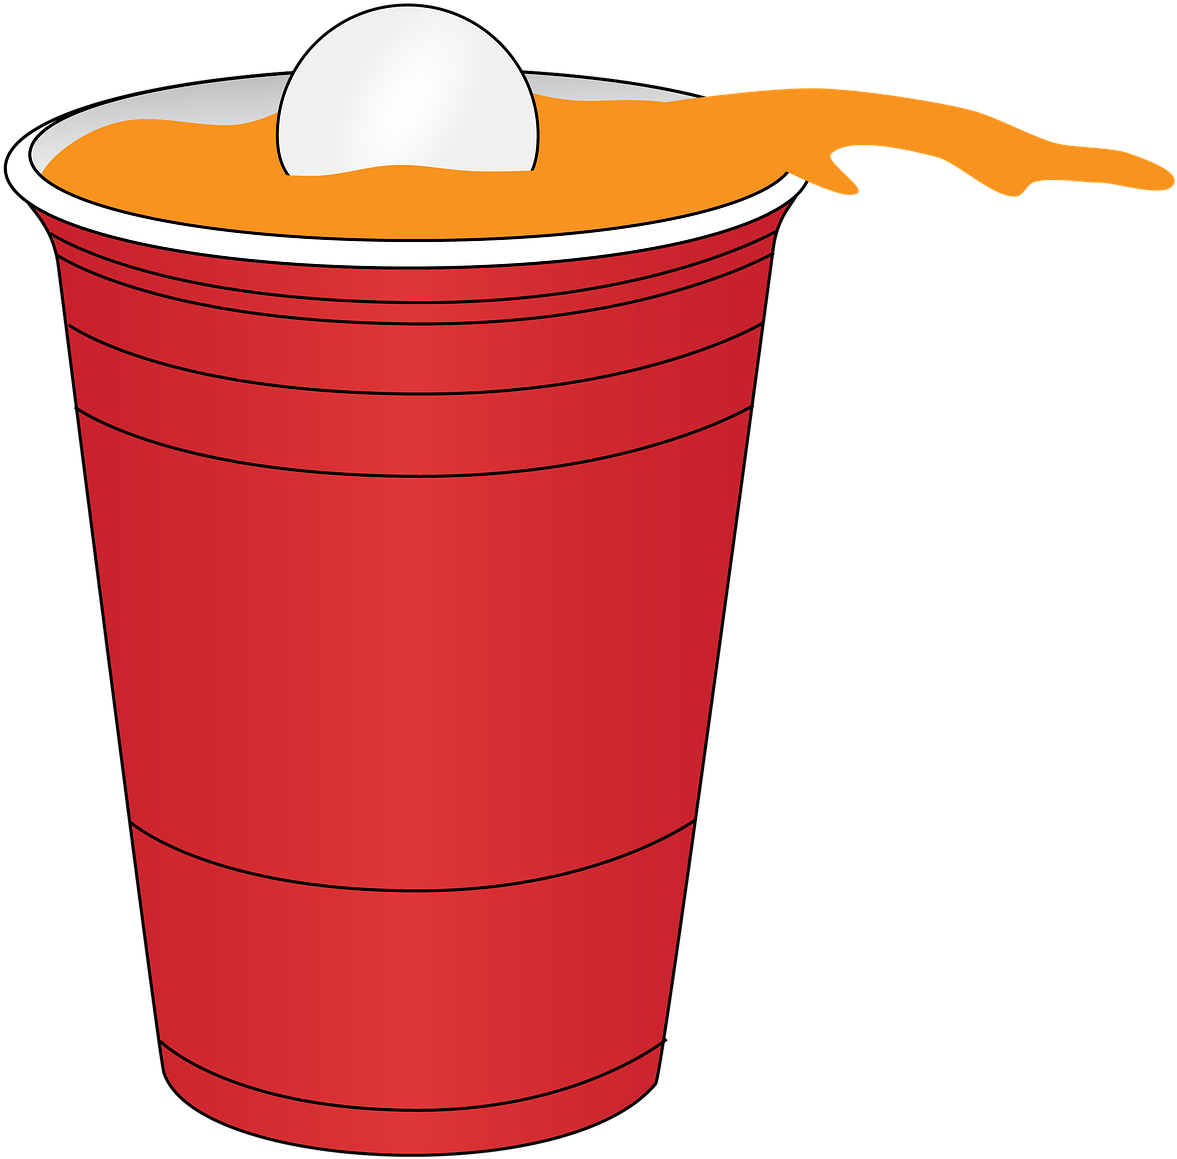 Alpha Brain Booze = The Next Level - Beer In Red Solo Cup (1280x1280)